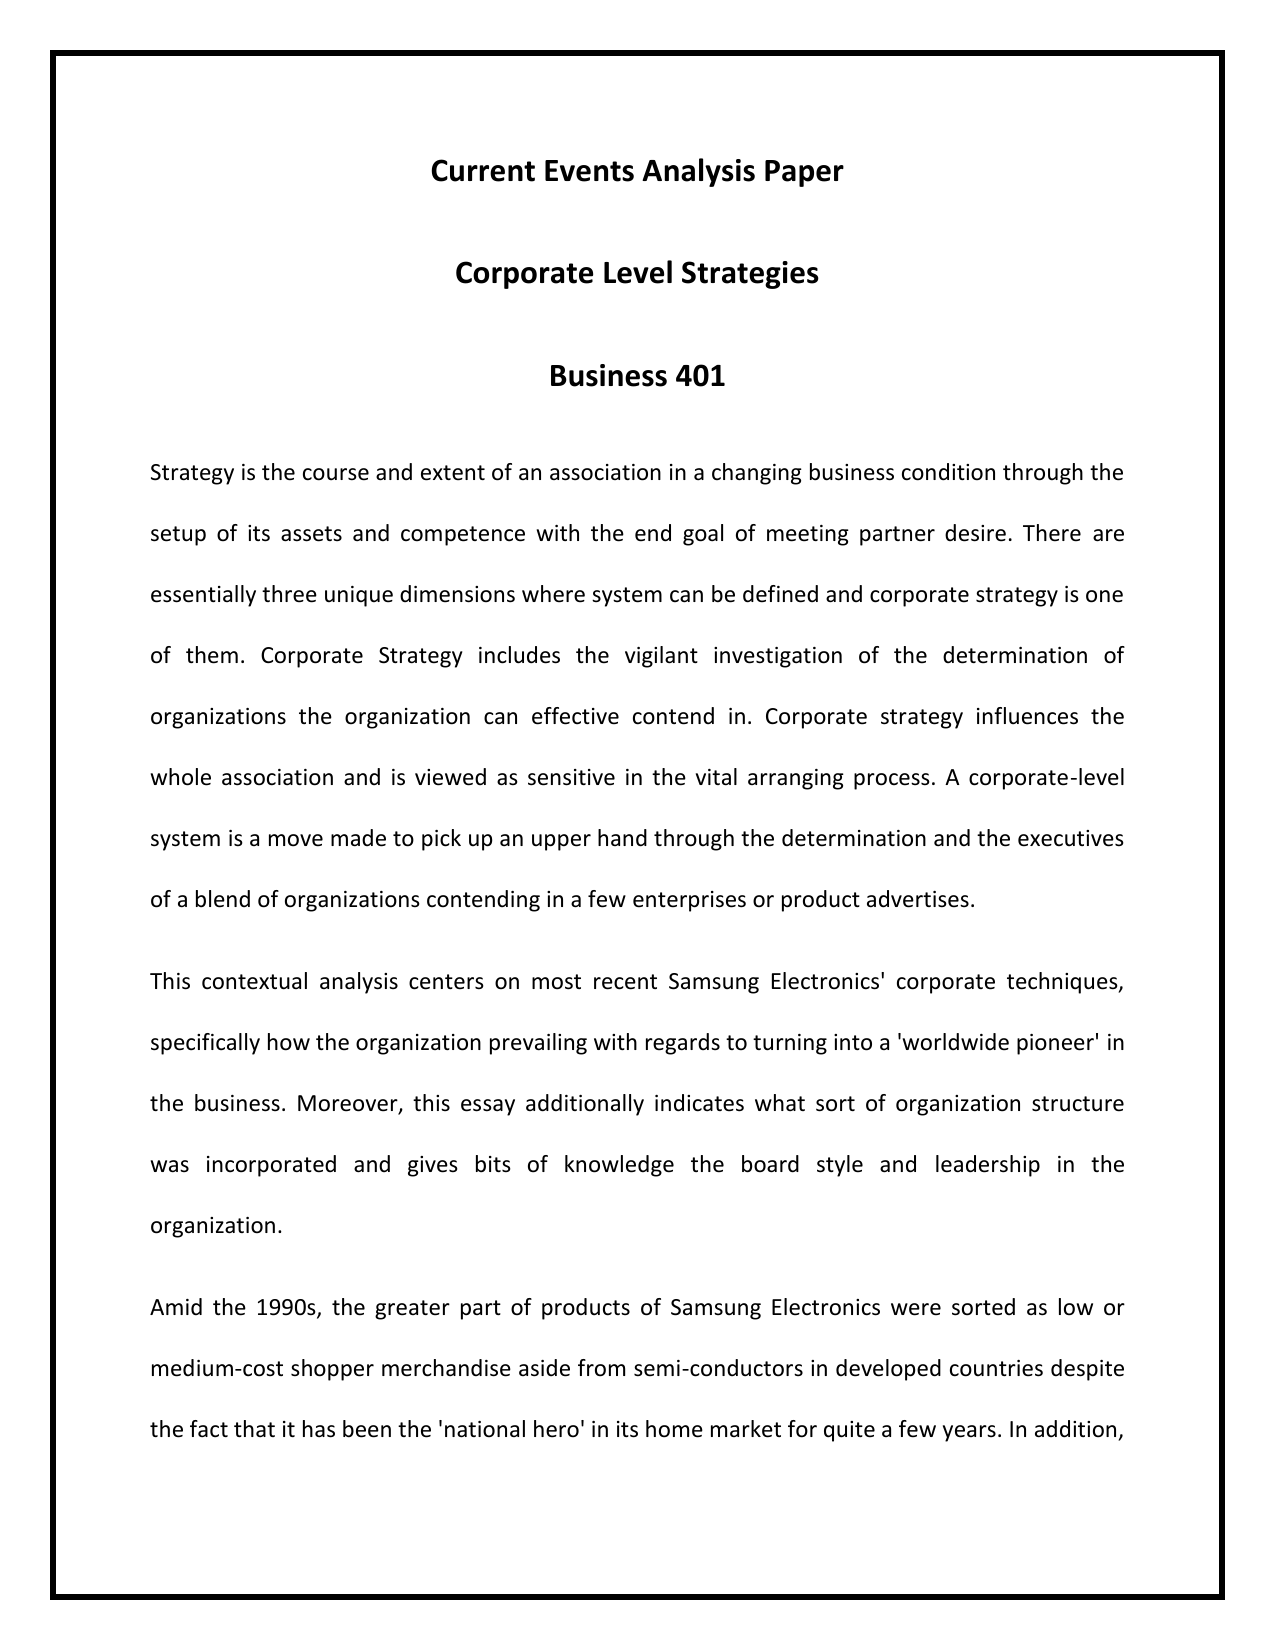 Реферат: Business Strategies Essay Research Paper Offensive and